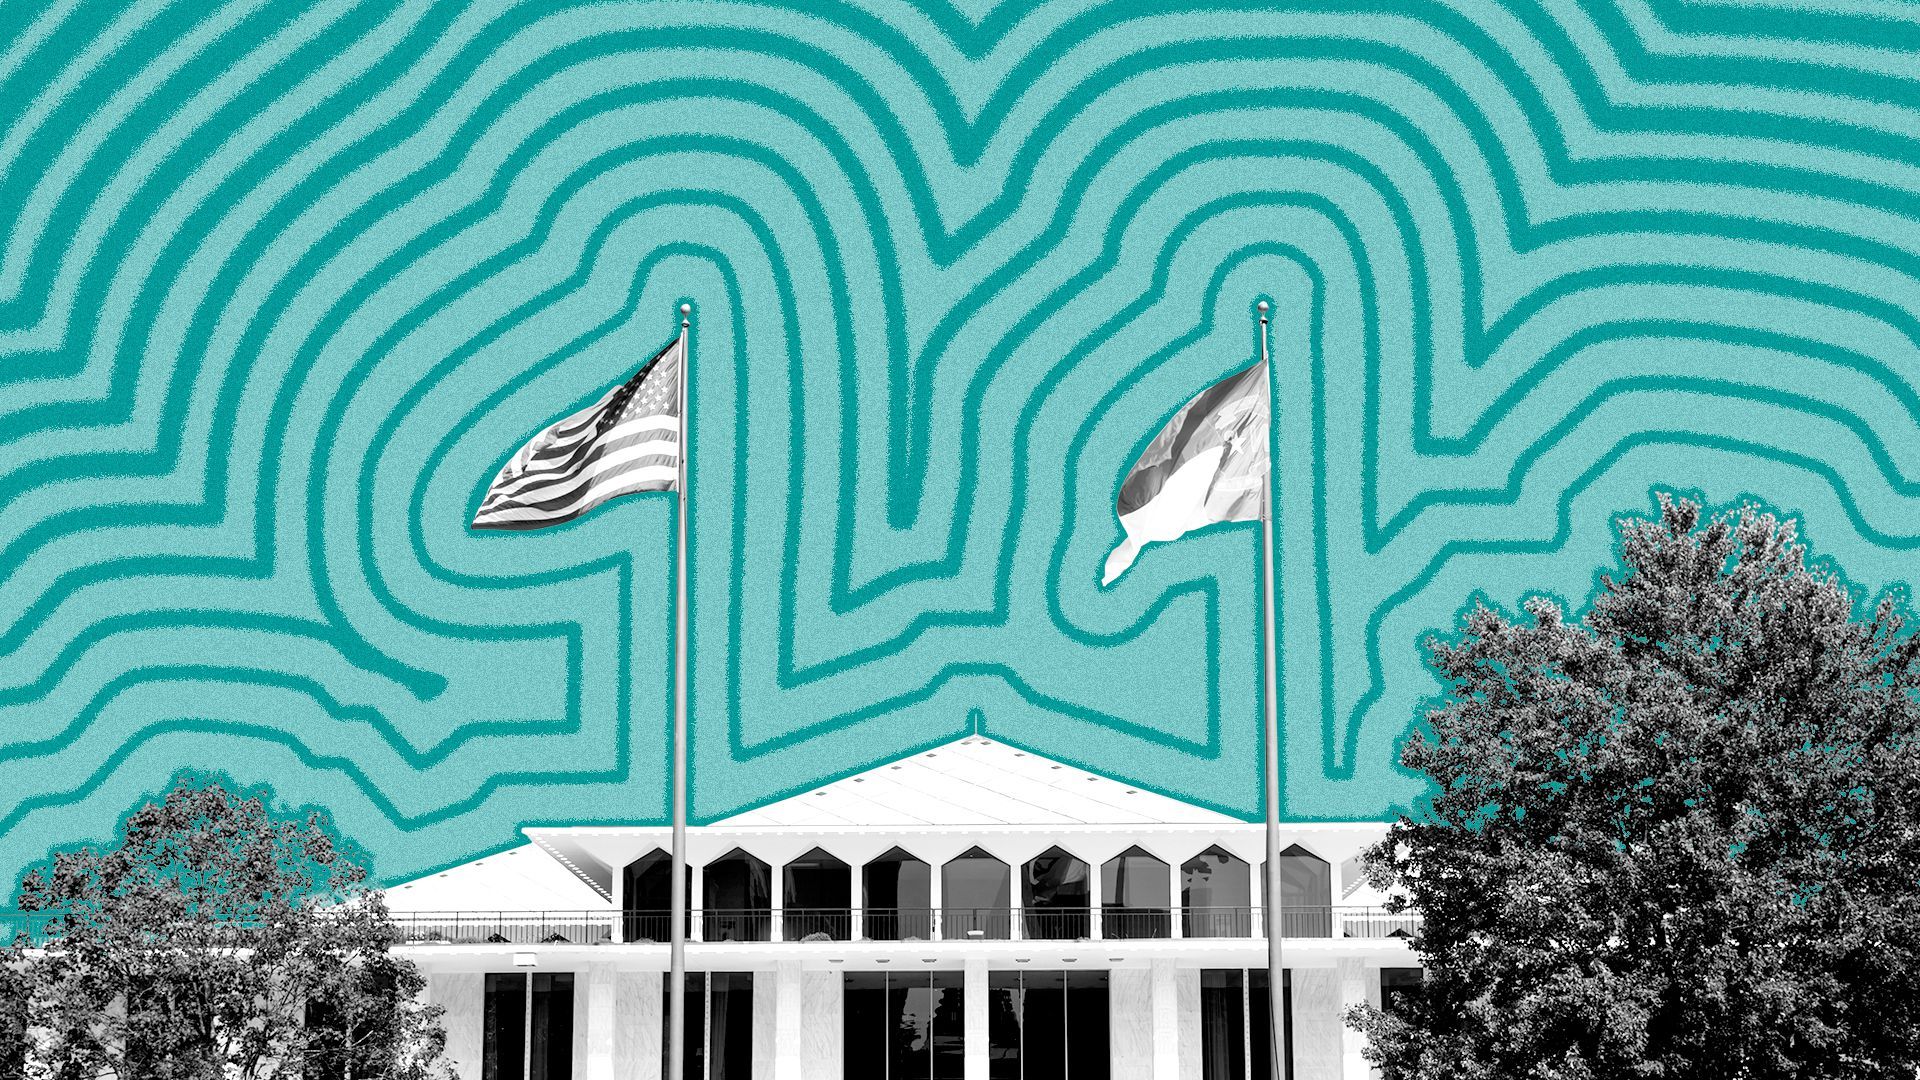 Illustration of the North Carolina Legislative Building with lines radiating from it.